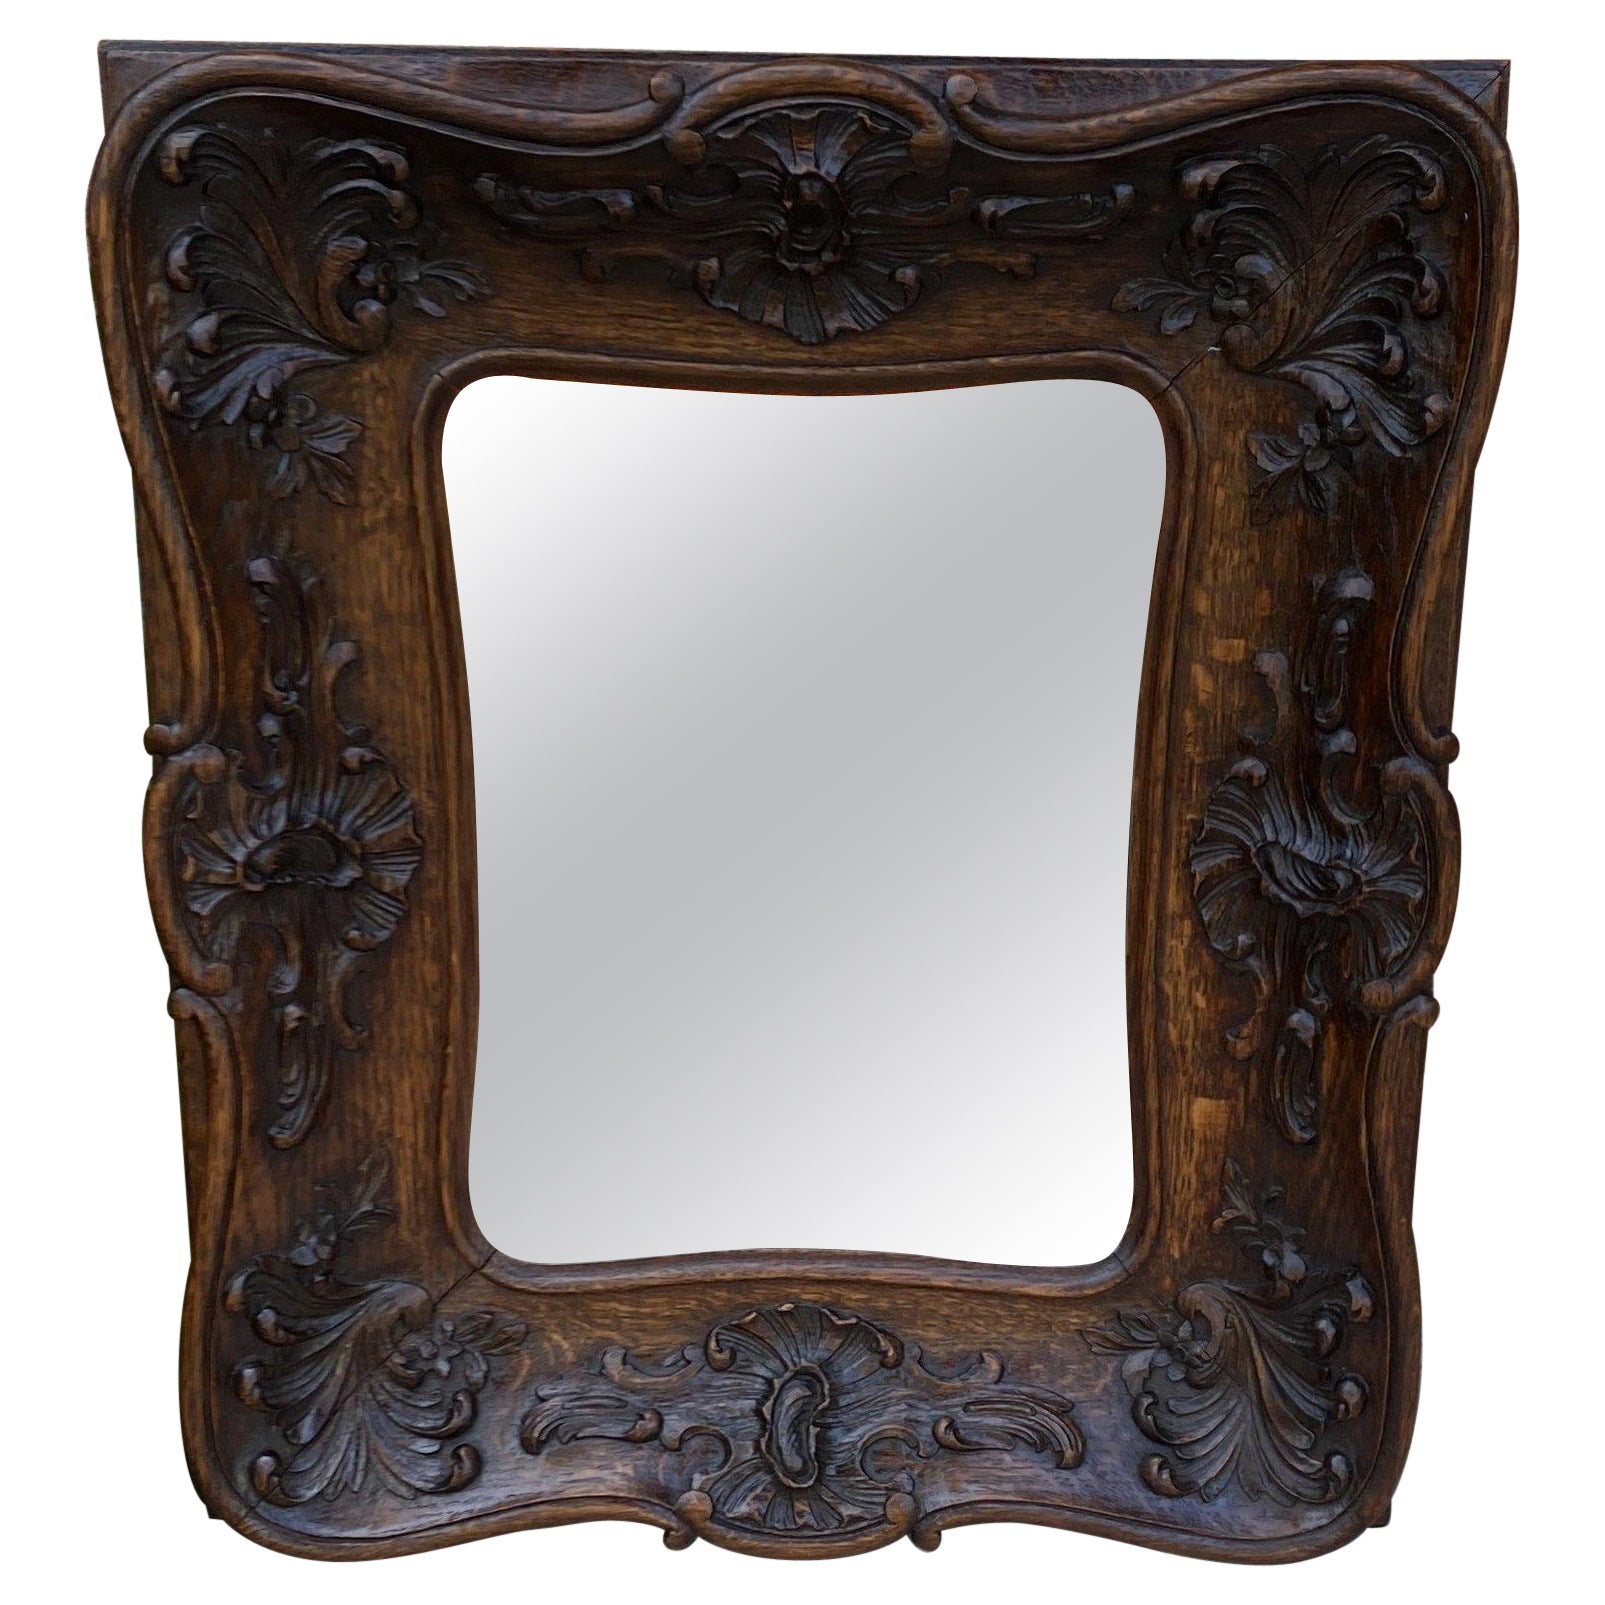 Antique French Rococo Mirror Carved Oak Wood Back Framed Wall Mirror 1920s